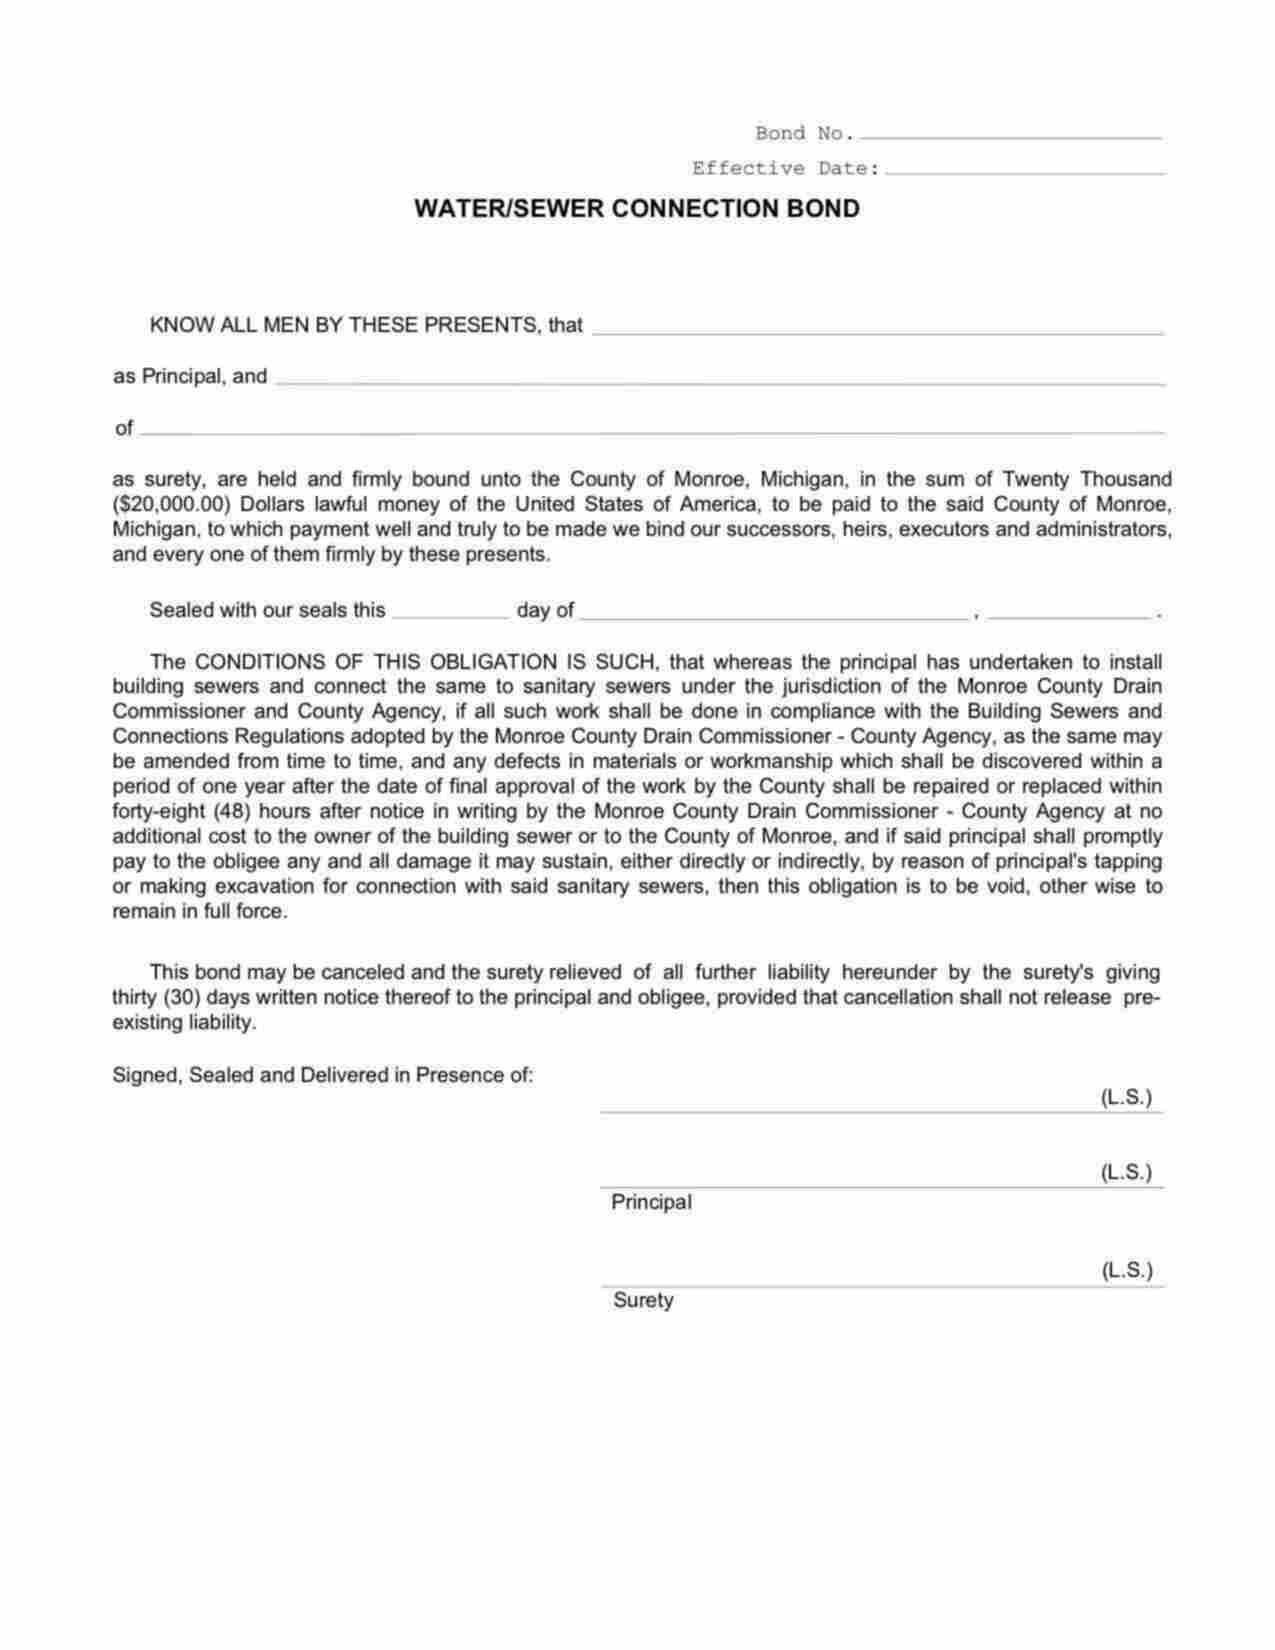 Michigan Water/Sewer Connection Bond Form